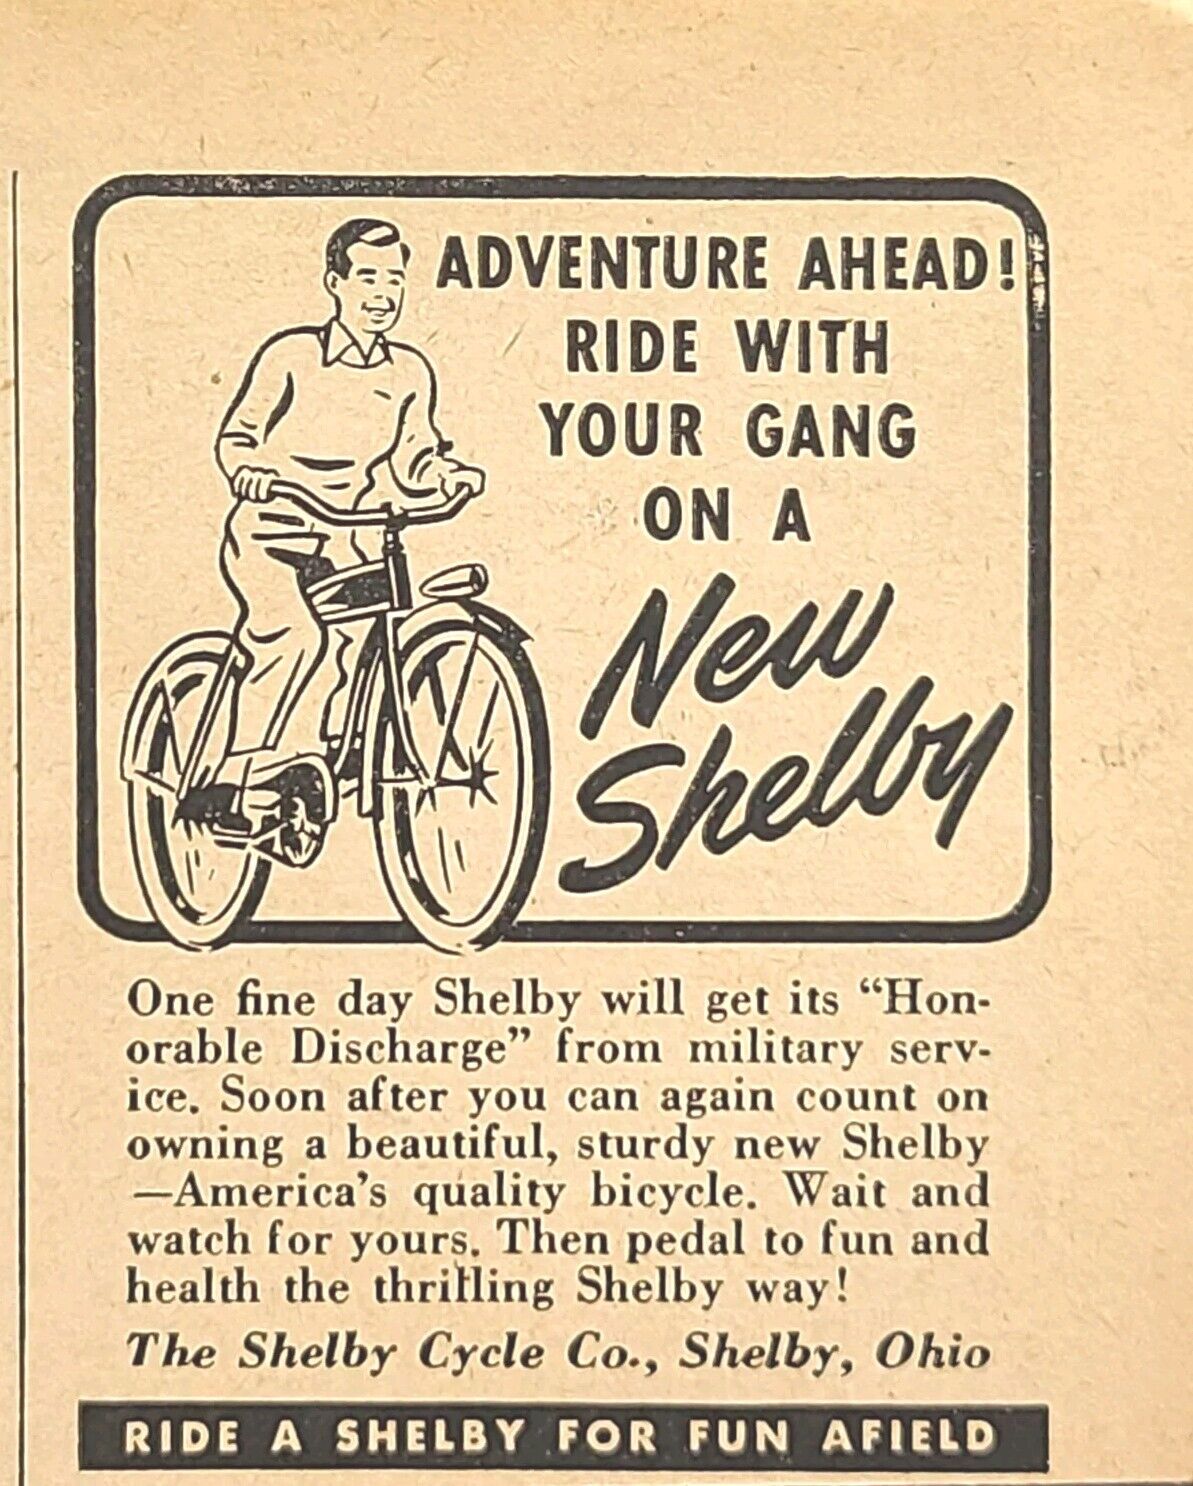 The Shelby Cycle Co Ride With Your Gang Bicycle Post War Vintage Print Ad 1945